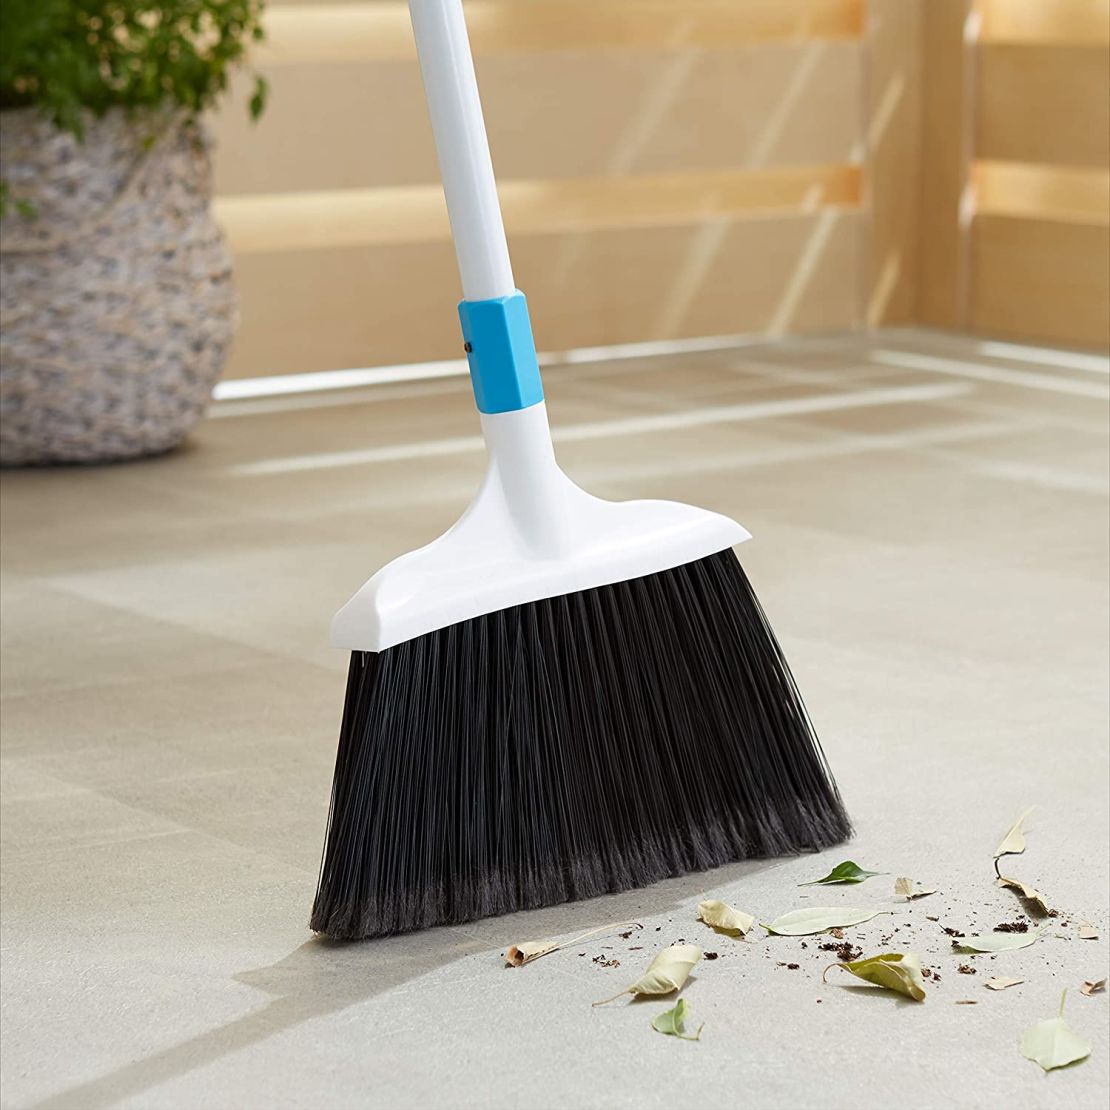 7 Tools To Clean Hard-To-Reach Areas